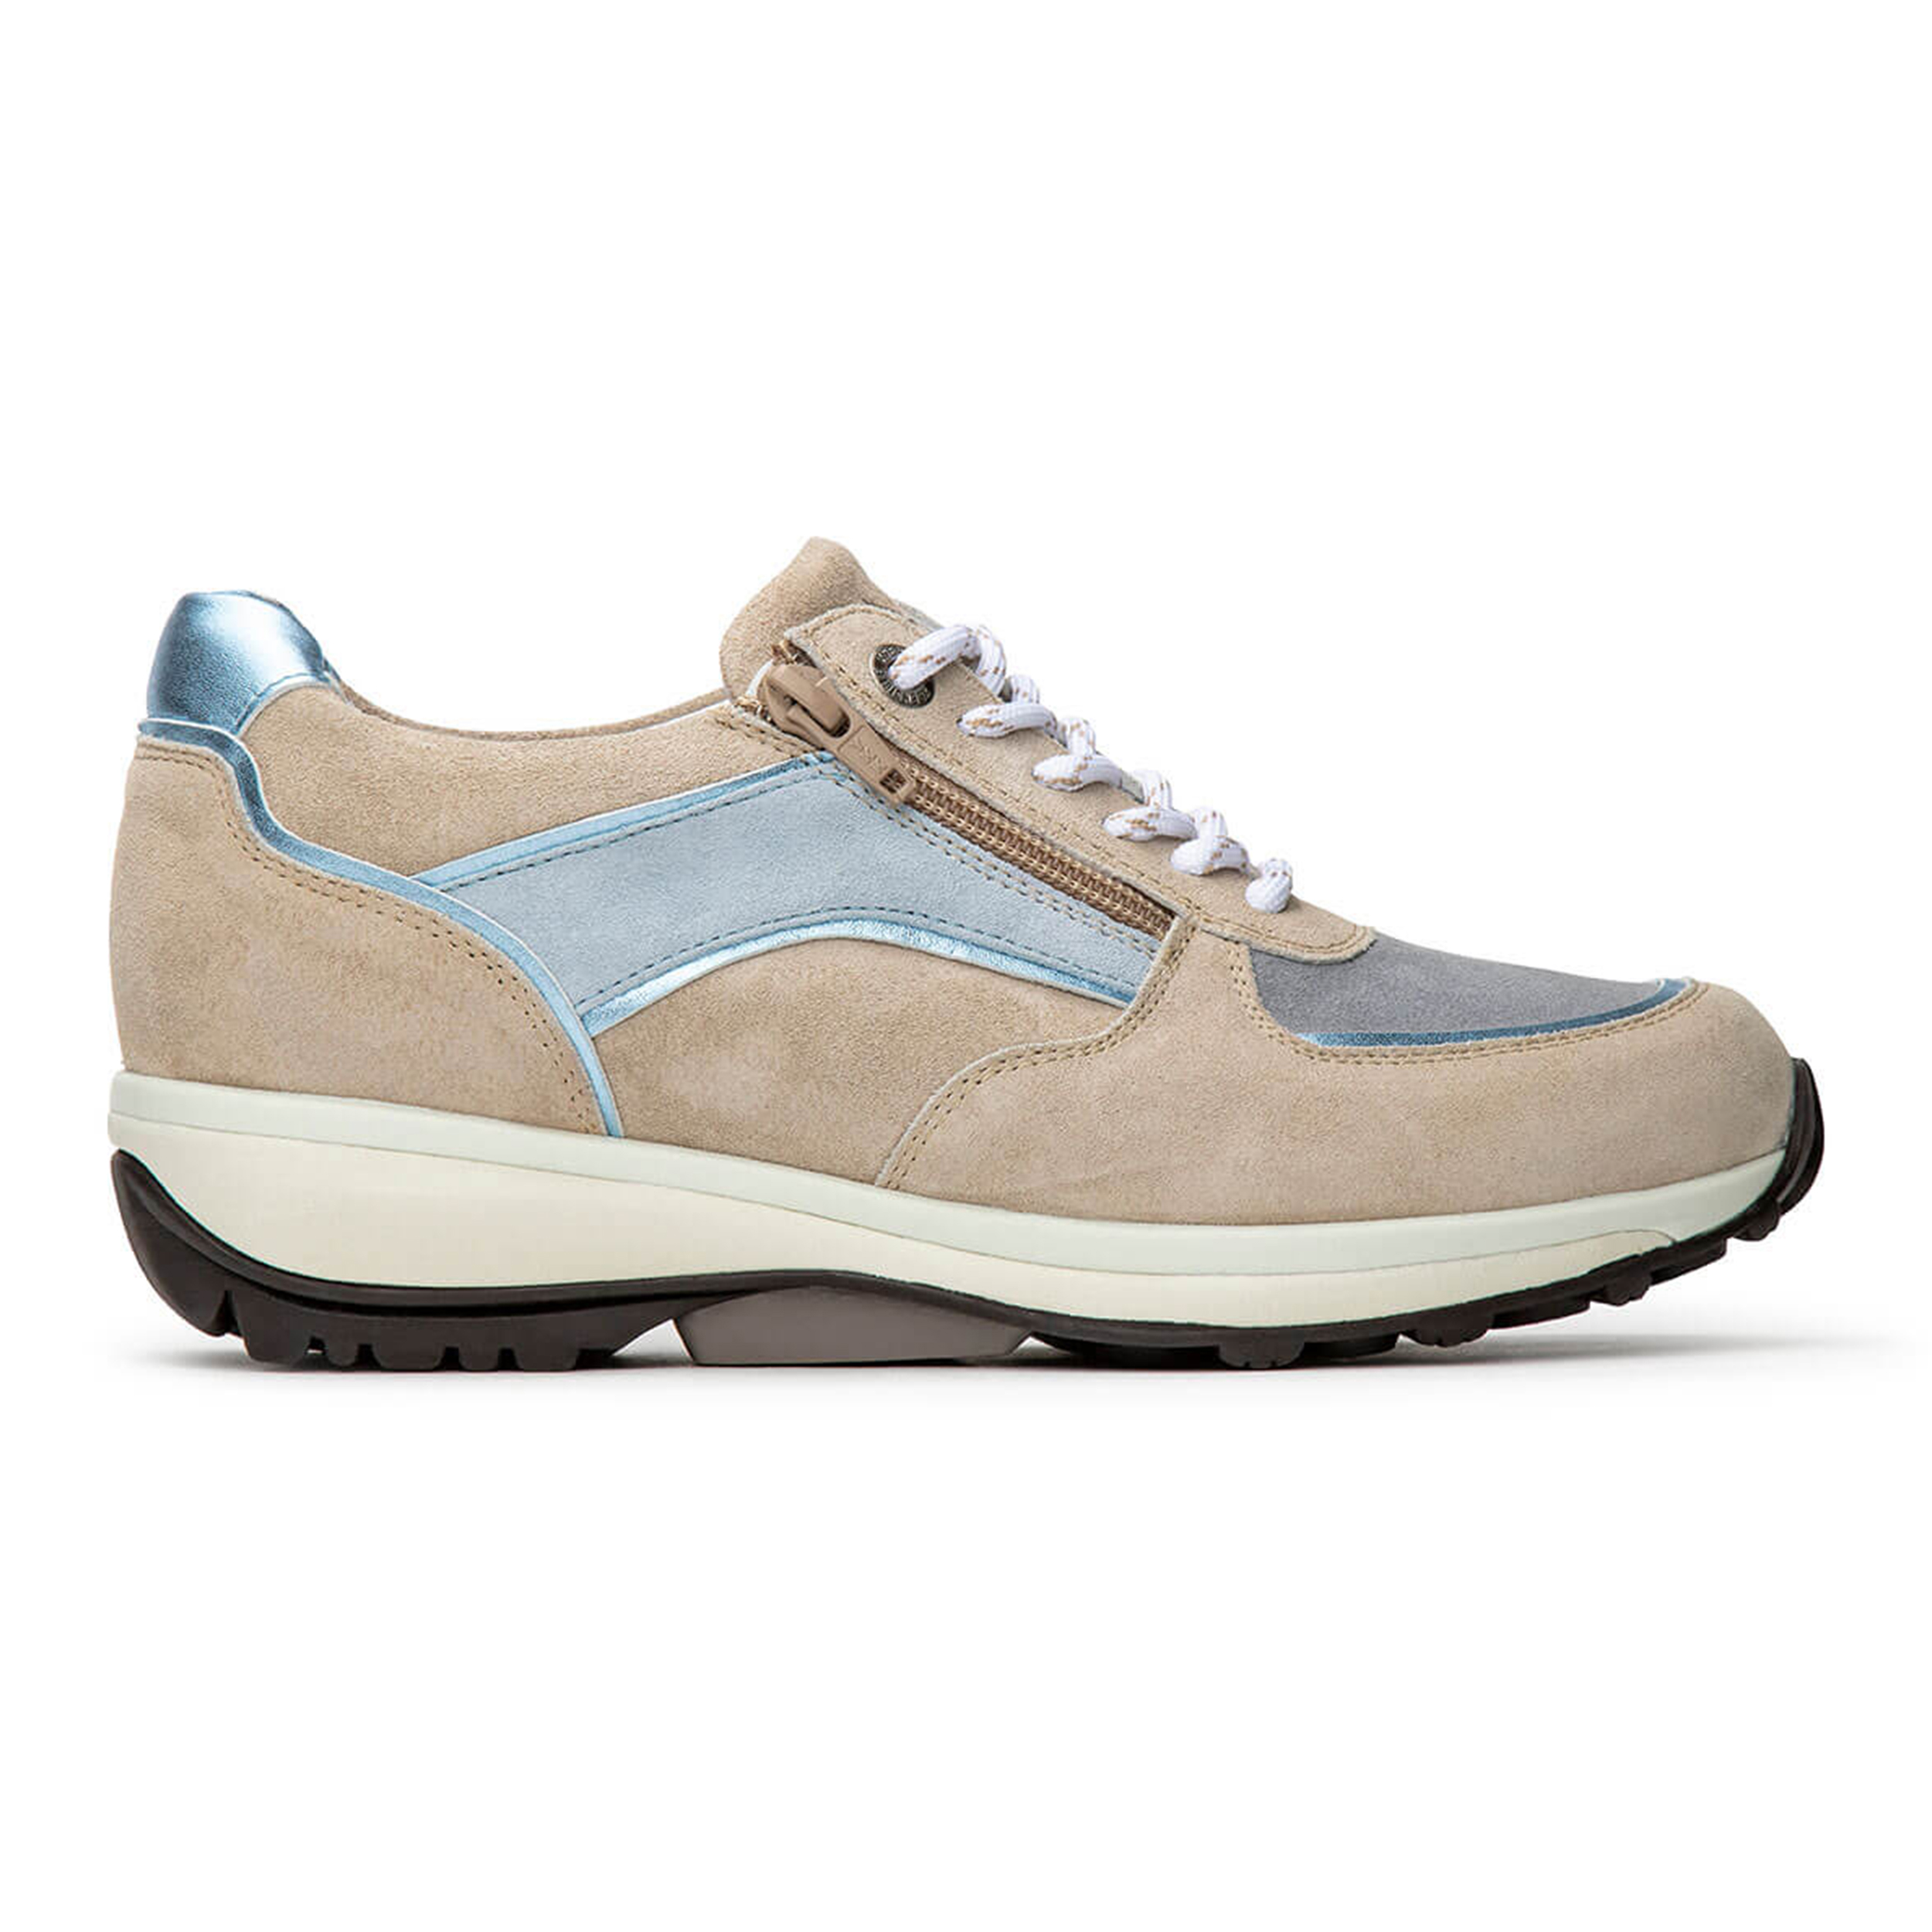 Xsensible 30112.2 Sneaker Lucca Sand Baby Blue Gx